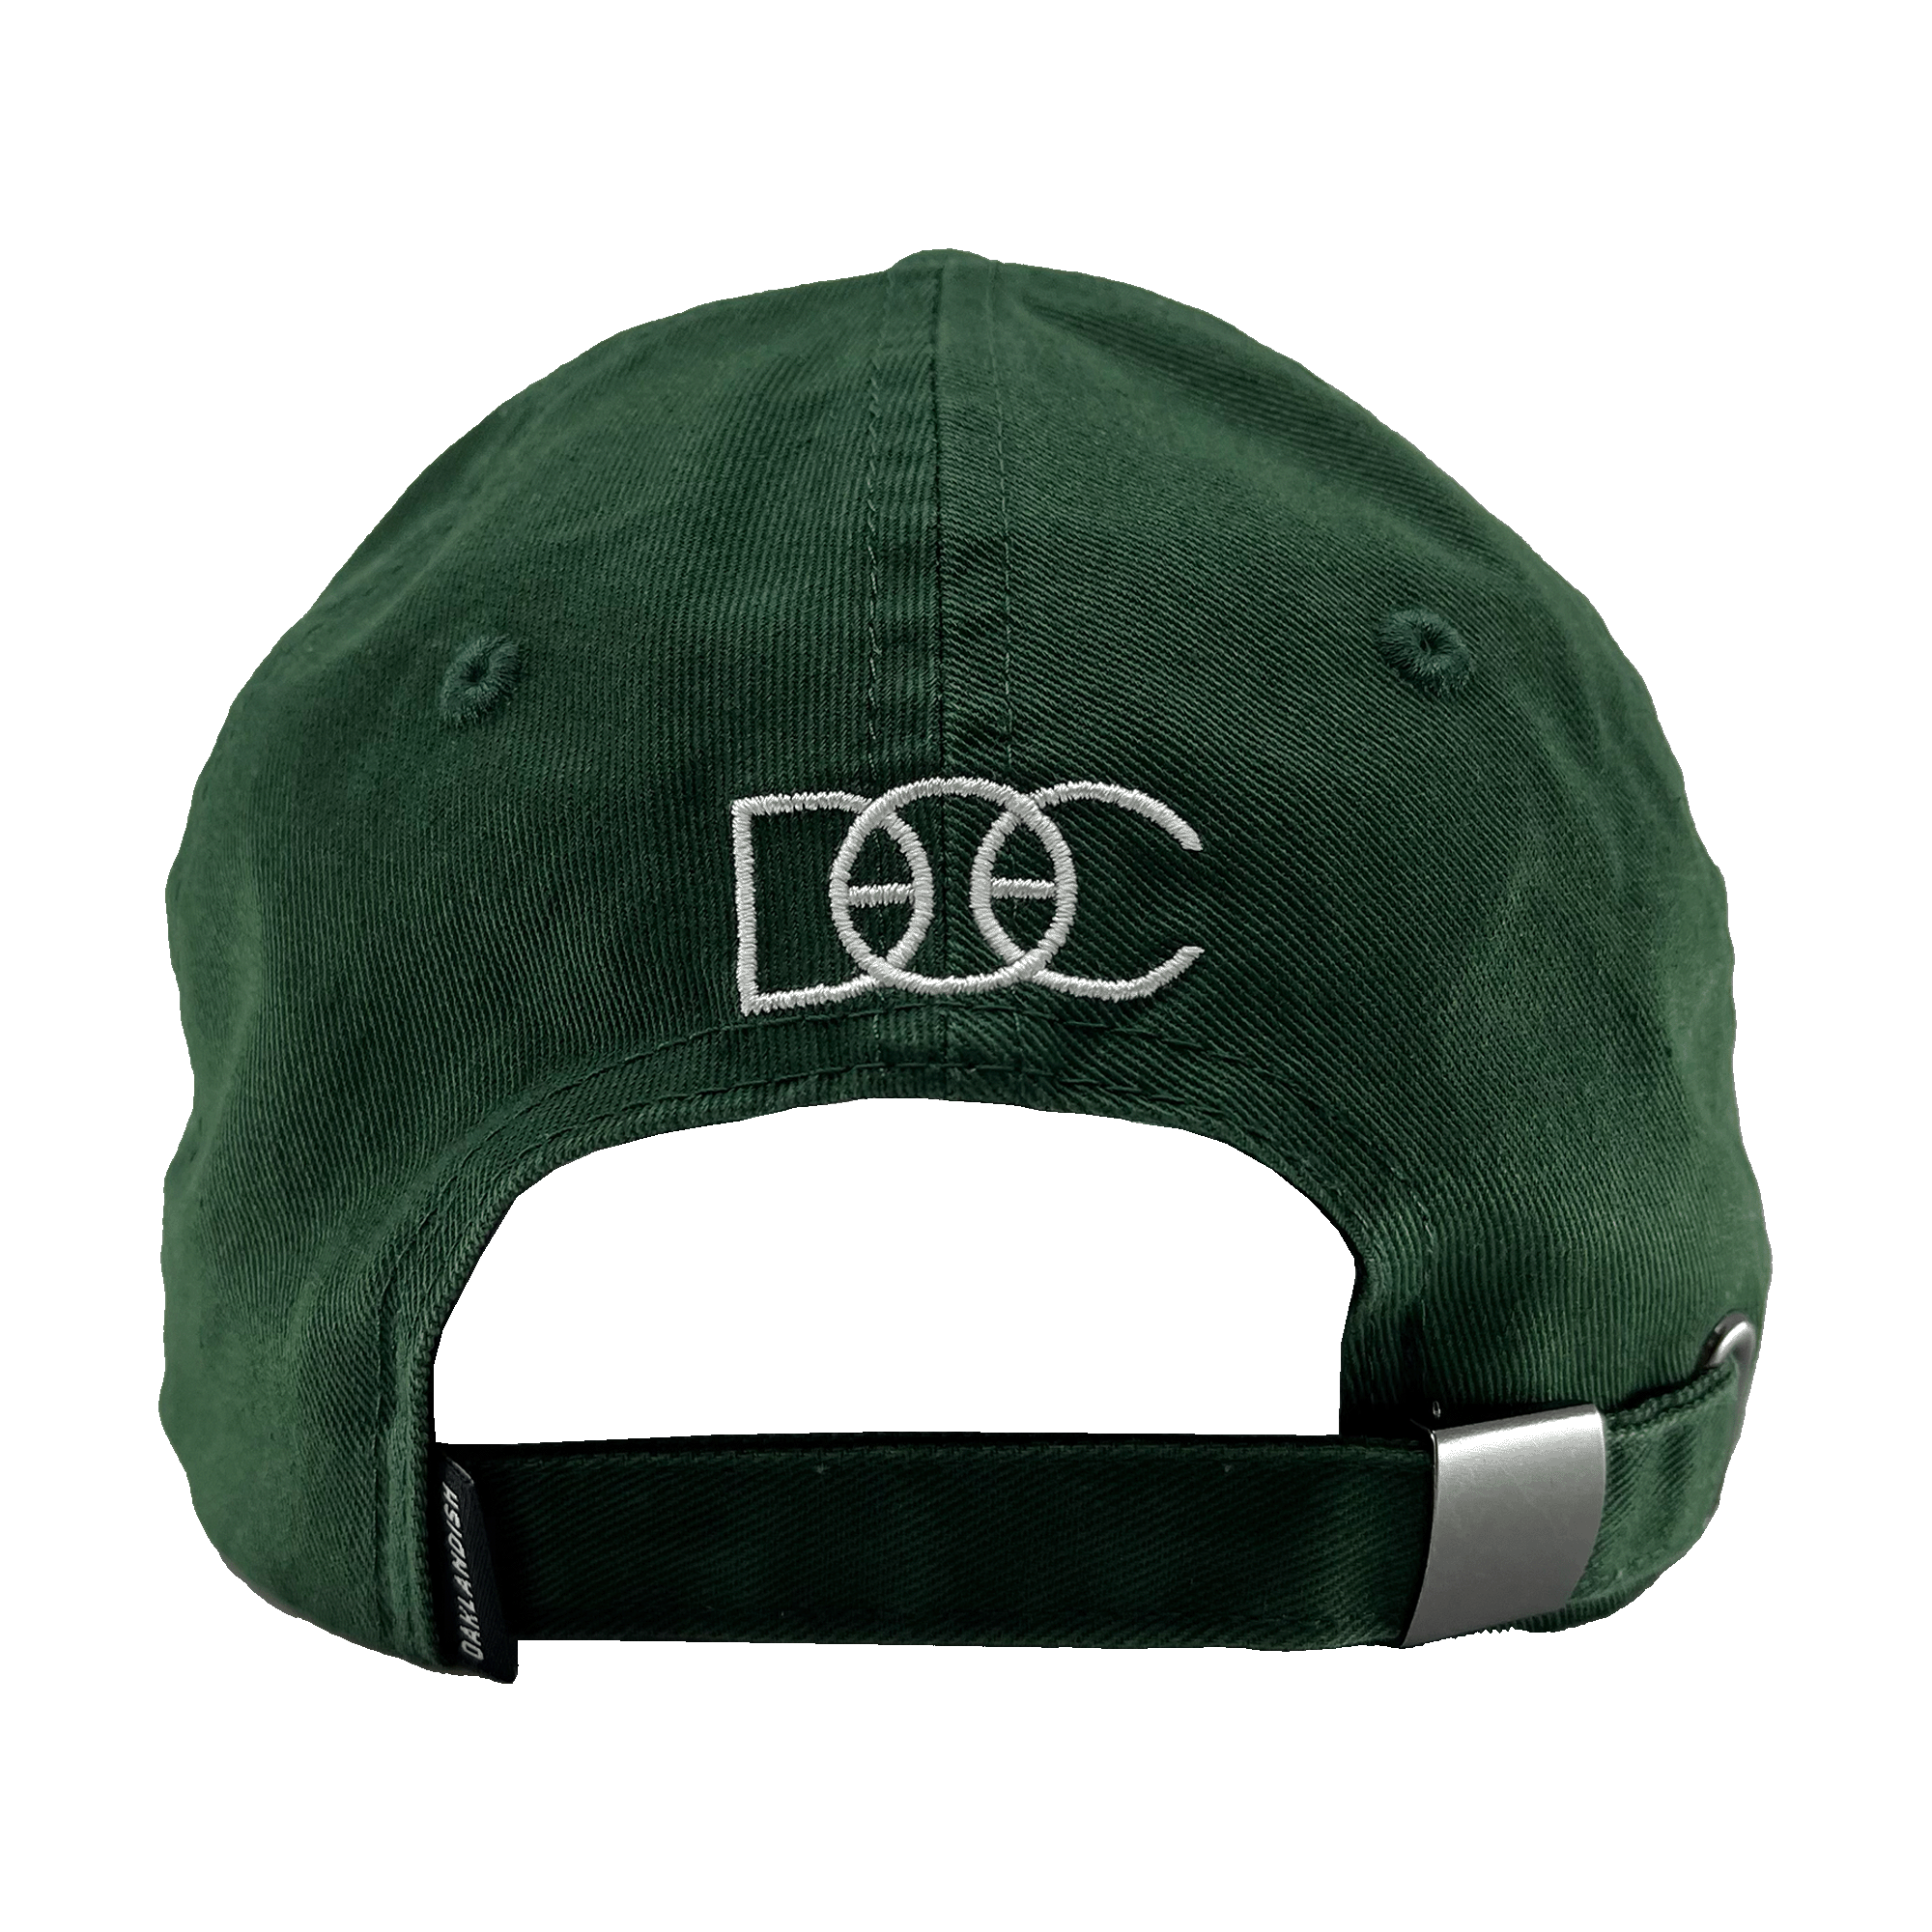 Back view of green Oakland Dad Hat designed by Dustin O. Canalin white embroidered DOC wordmark, adjustable strapback, and small Oaklandish wordmark tag.